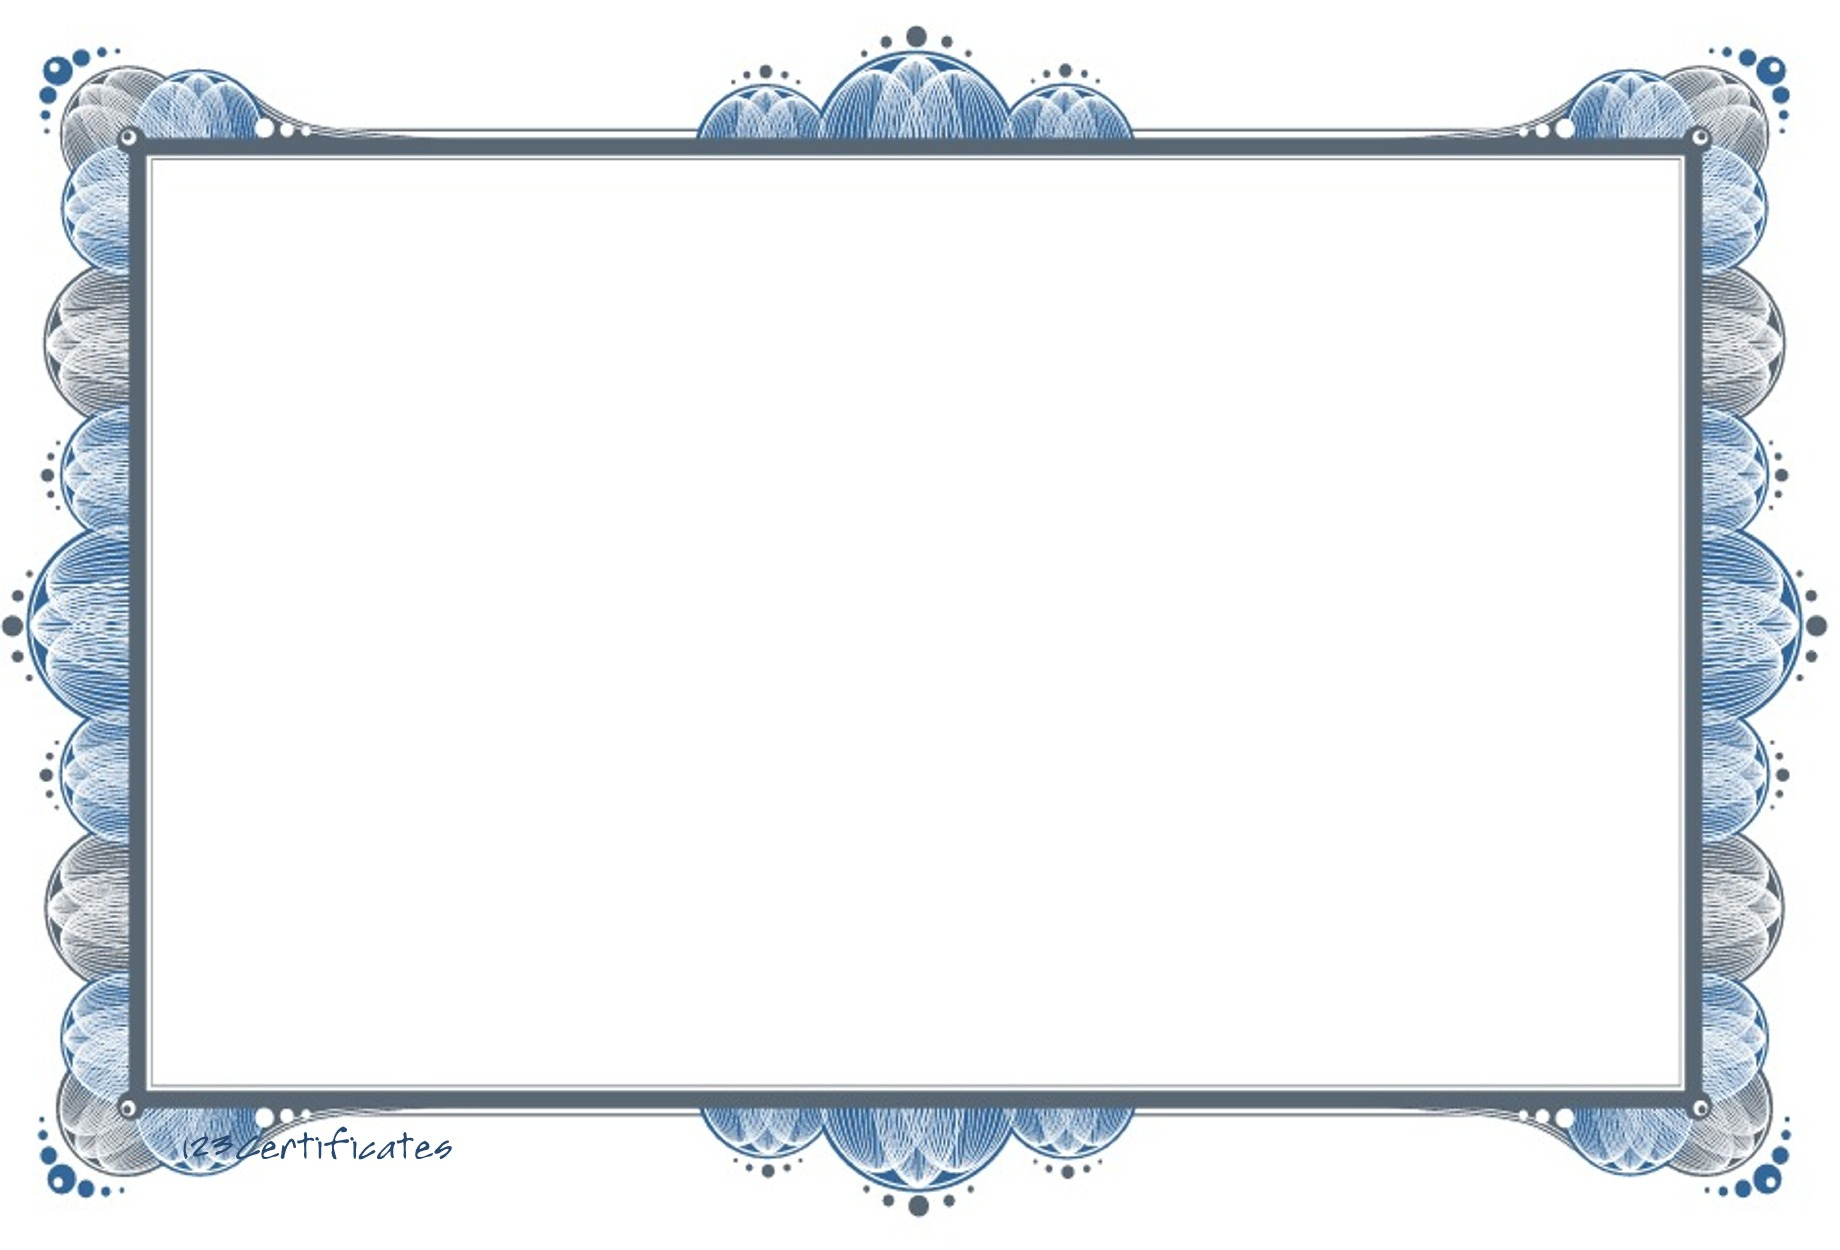 Free Certificate Borders To Download Within Free Certificate Templates For Word 2007